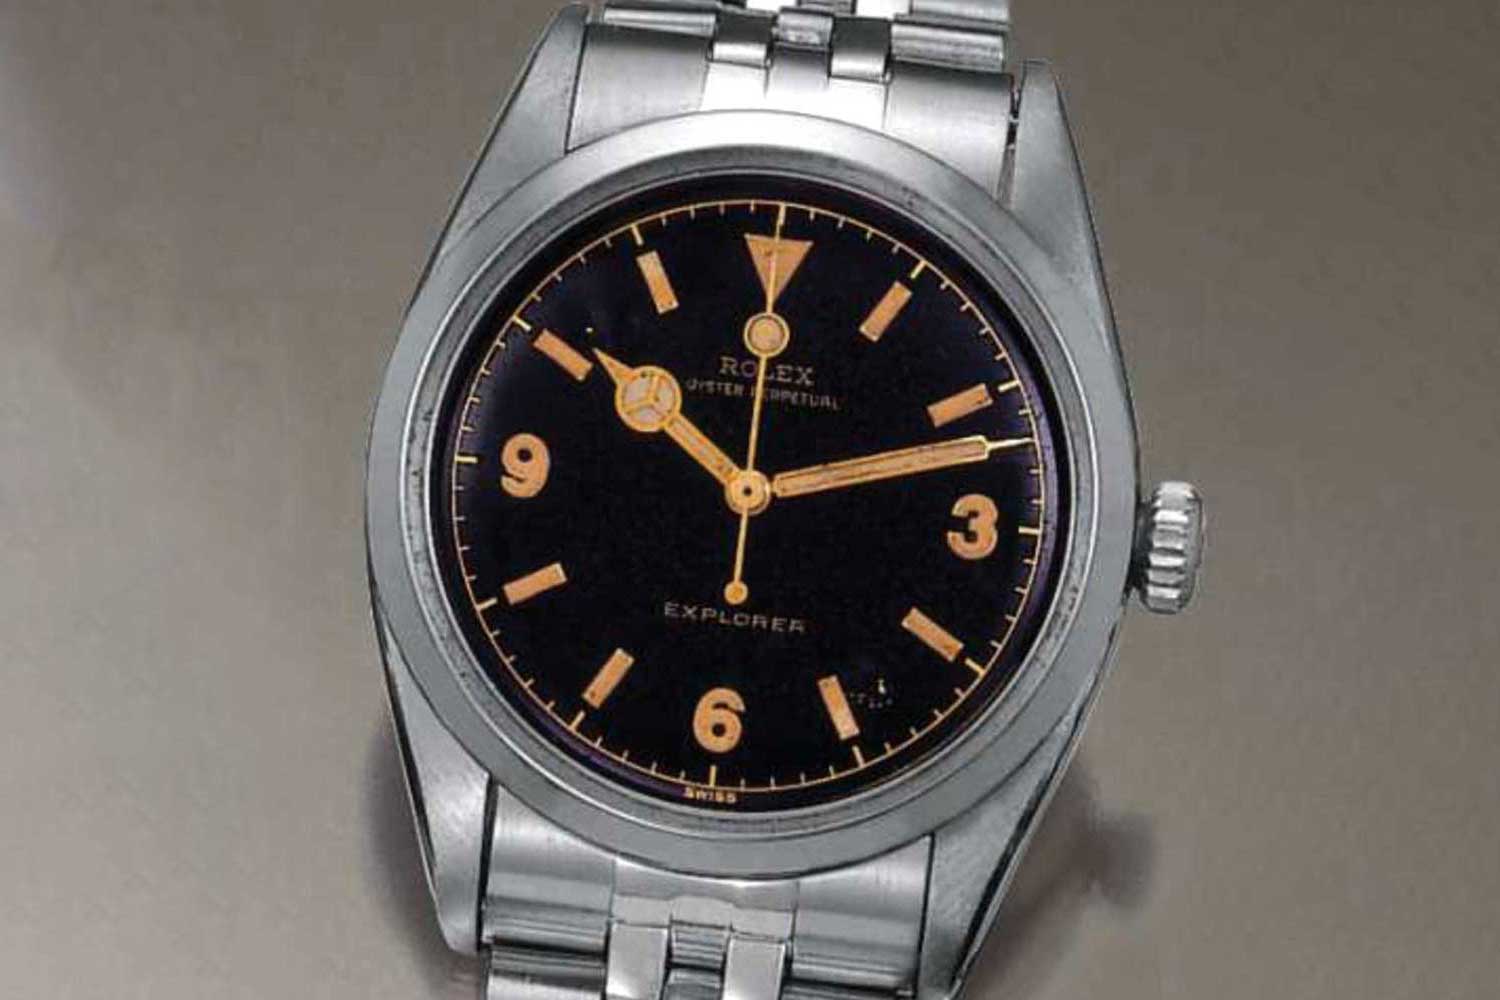 The Rolex Explorer Ref. 6350 with “pencil” hands was chronometer rated Officially Certified Chronometer (OCC)